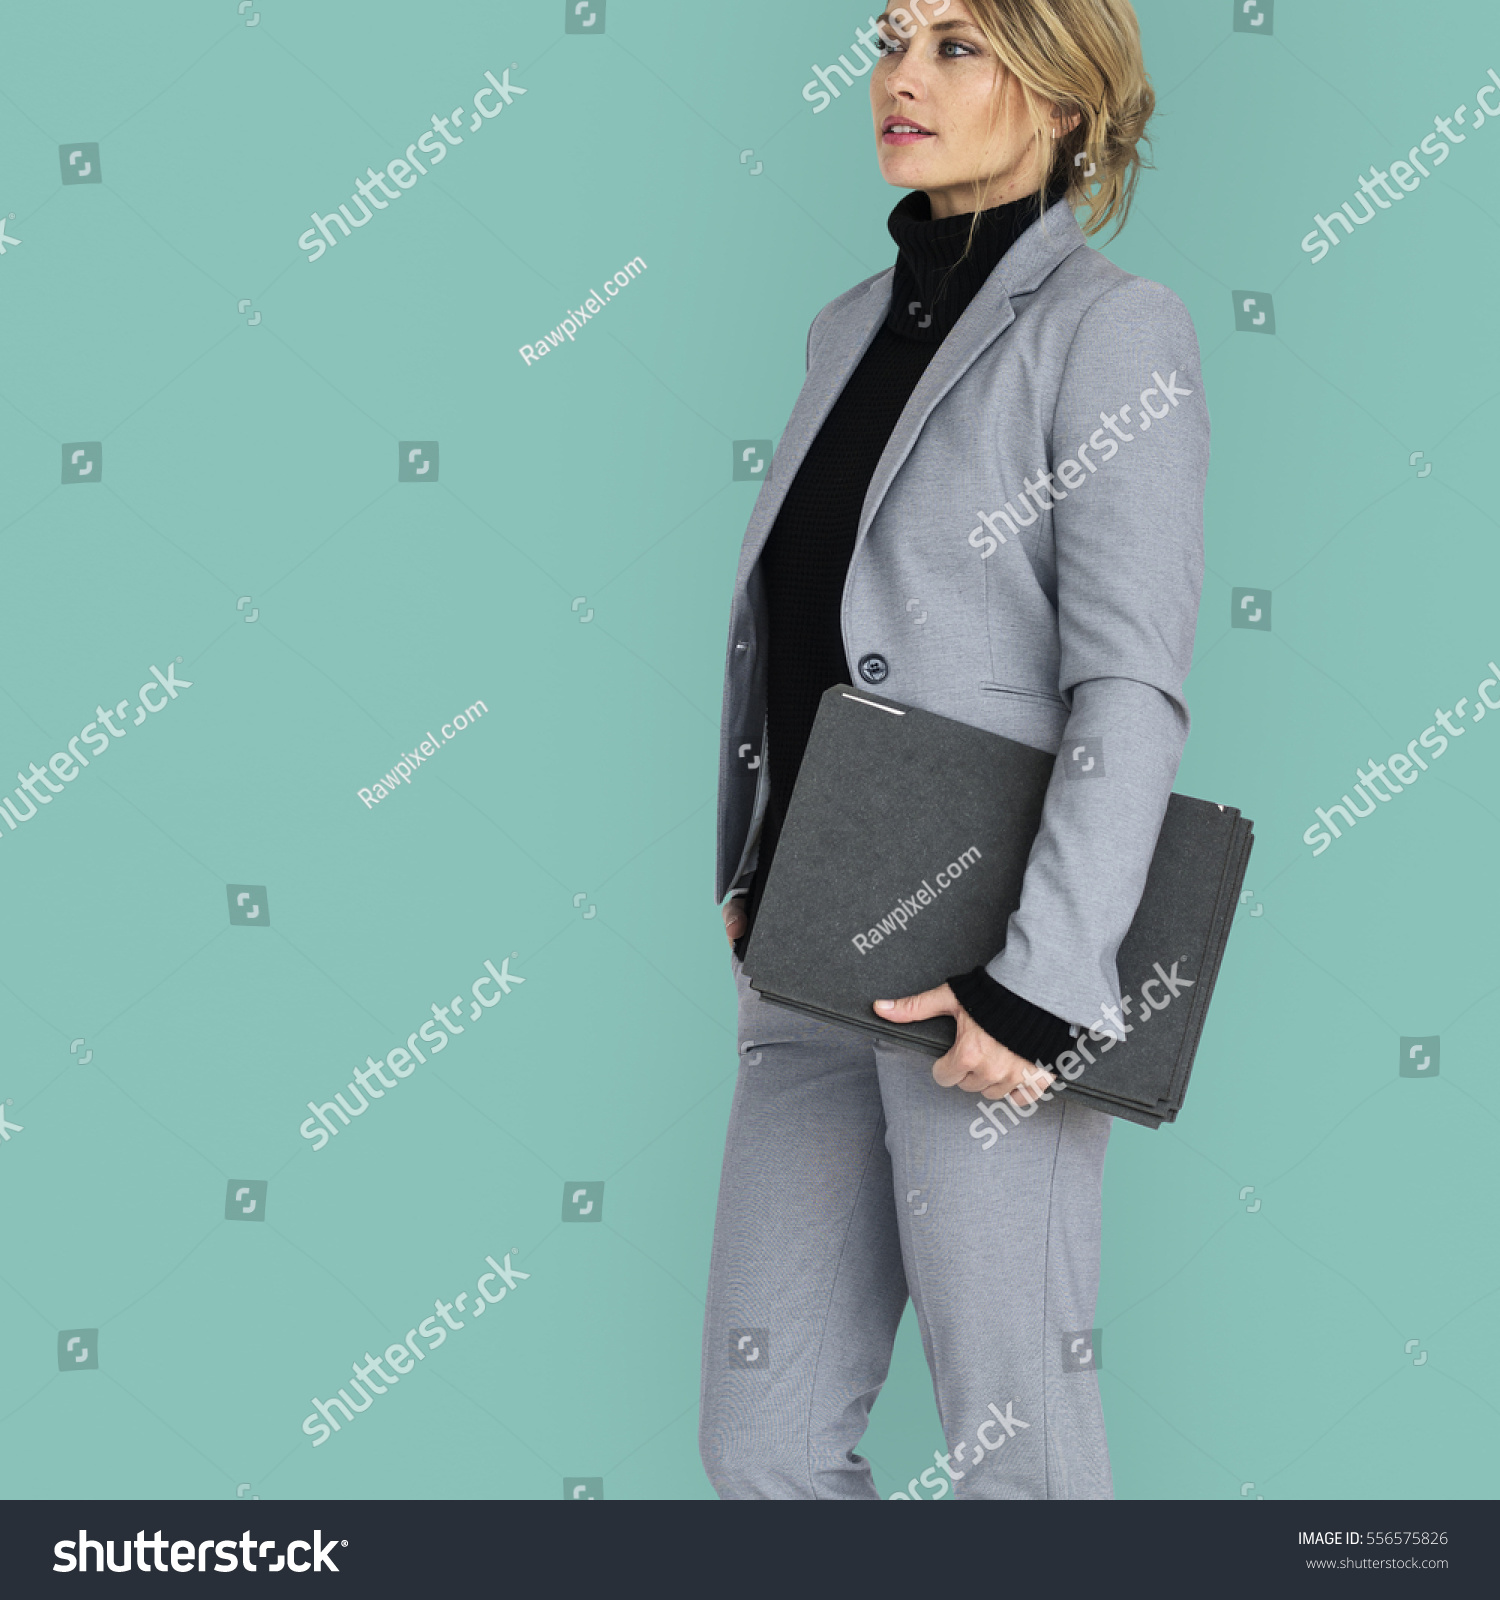 Caucasian Business Woman Holding Bag Stock Photo (Royalty Free ...